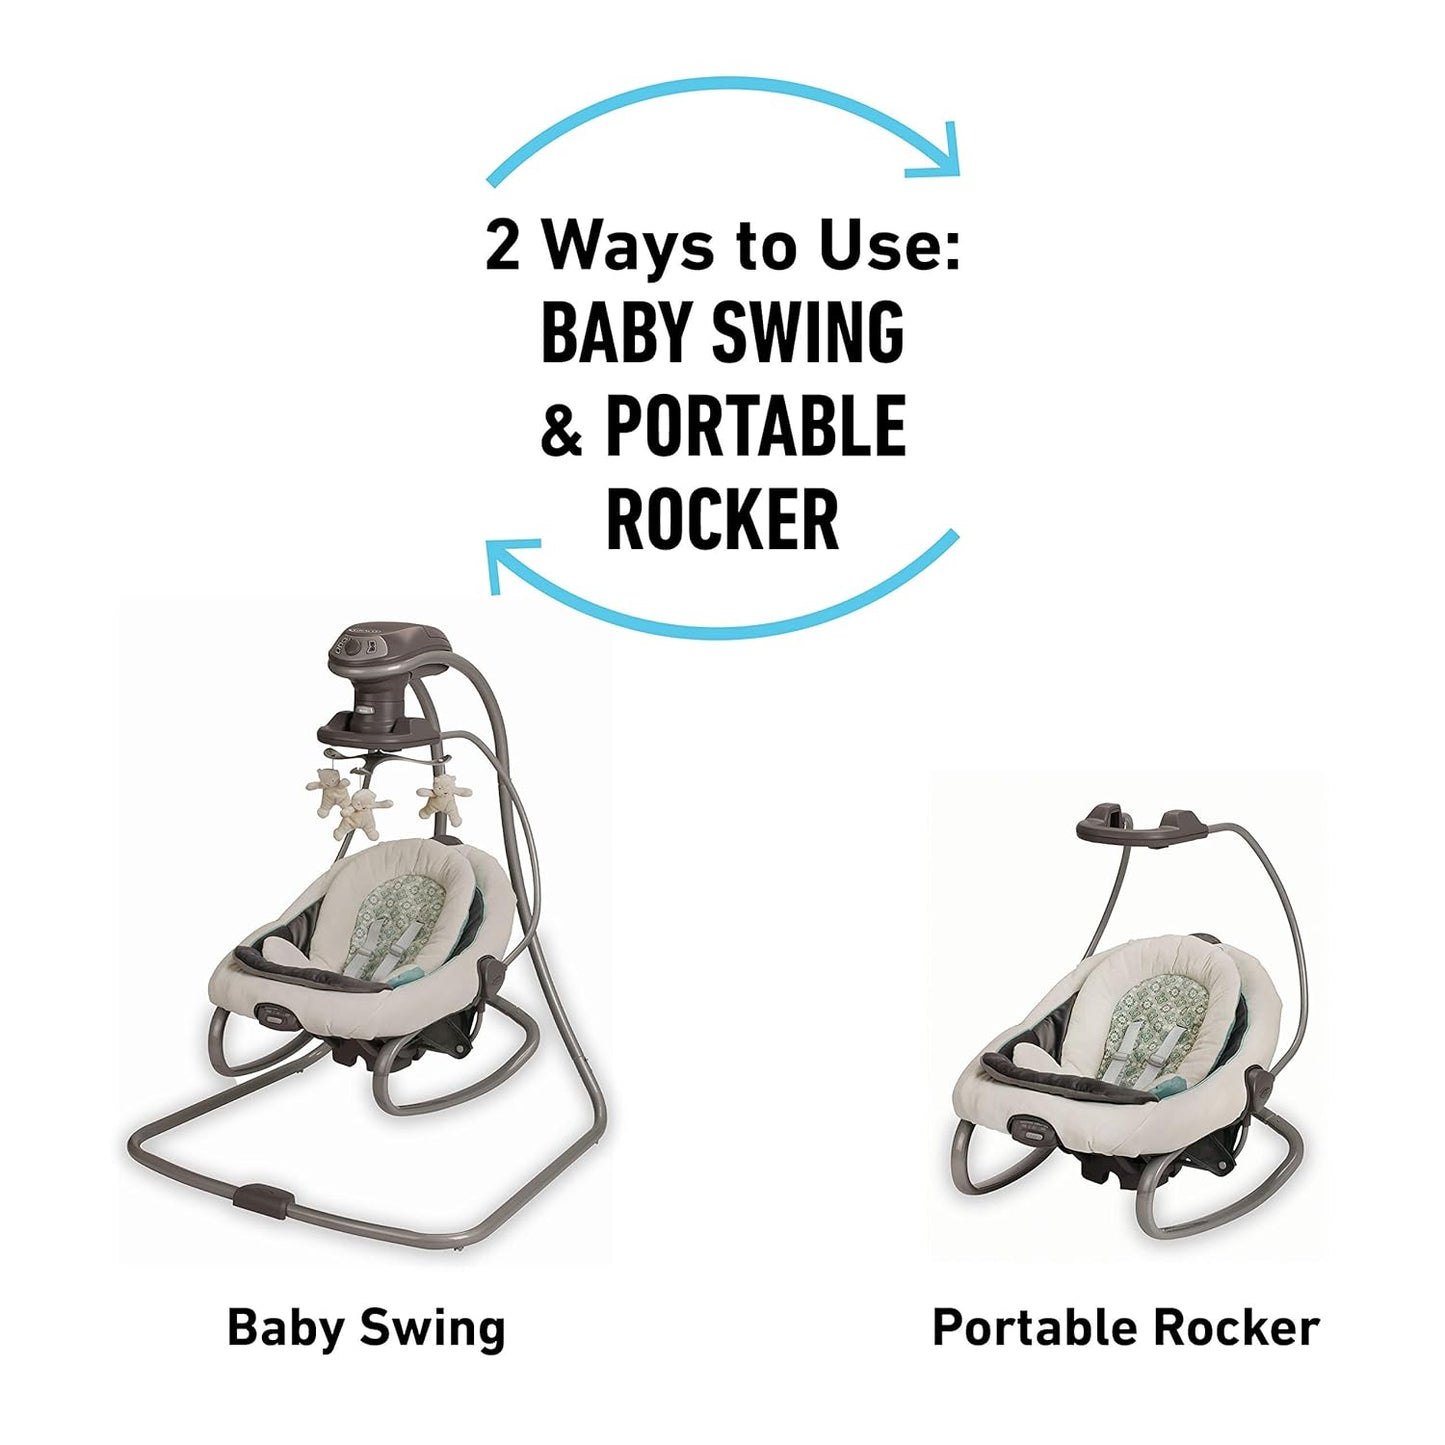 New Graco DuetSoothe Multi-Direction Swing and Rocker (Winslet)